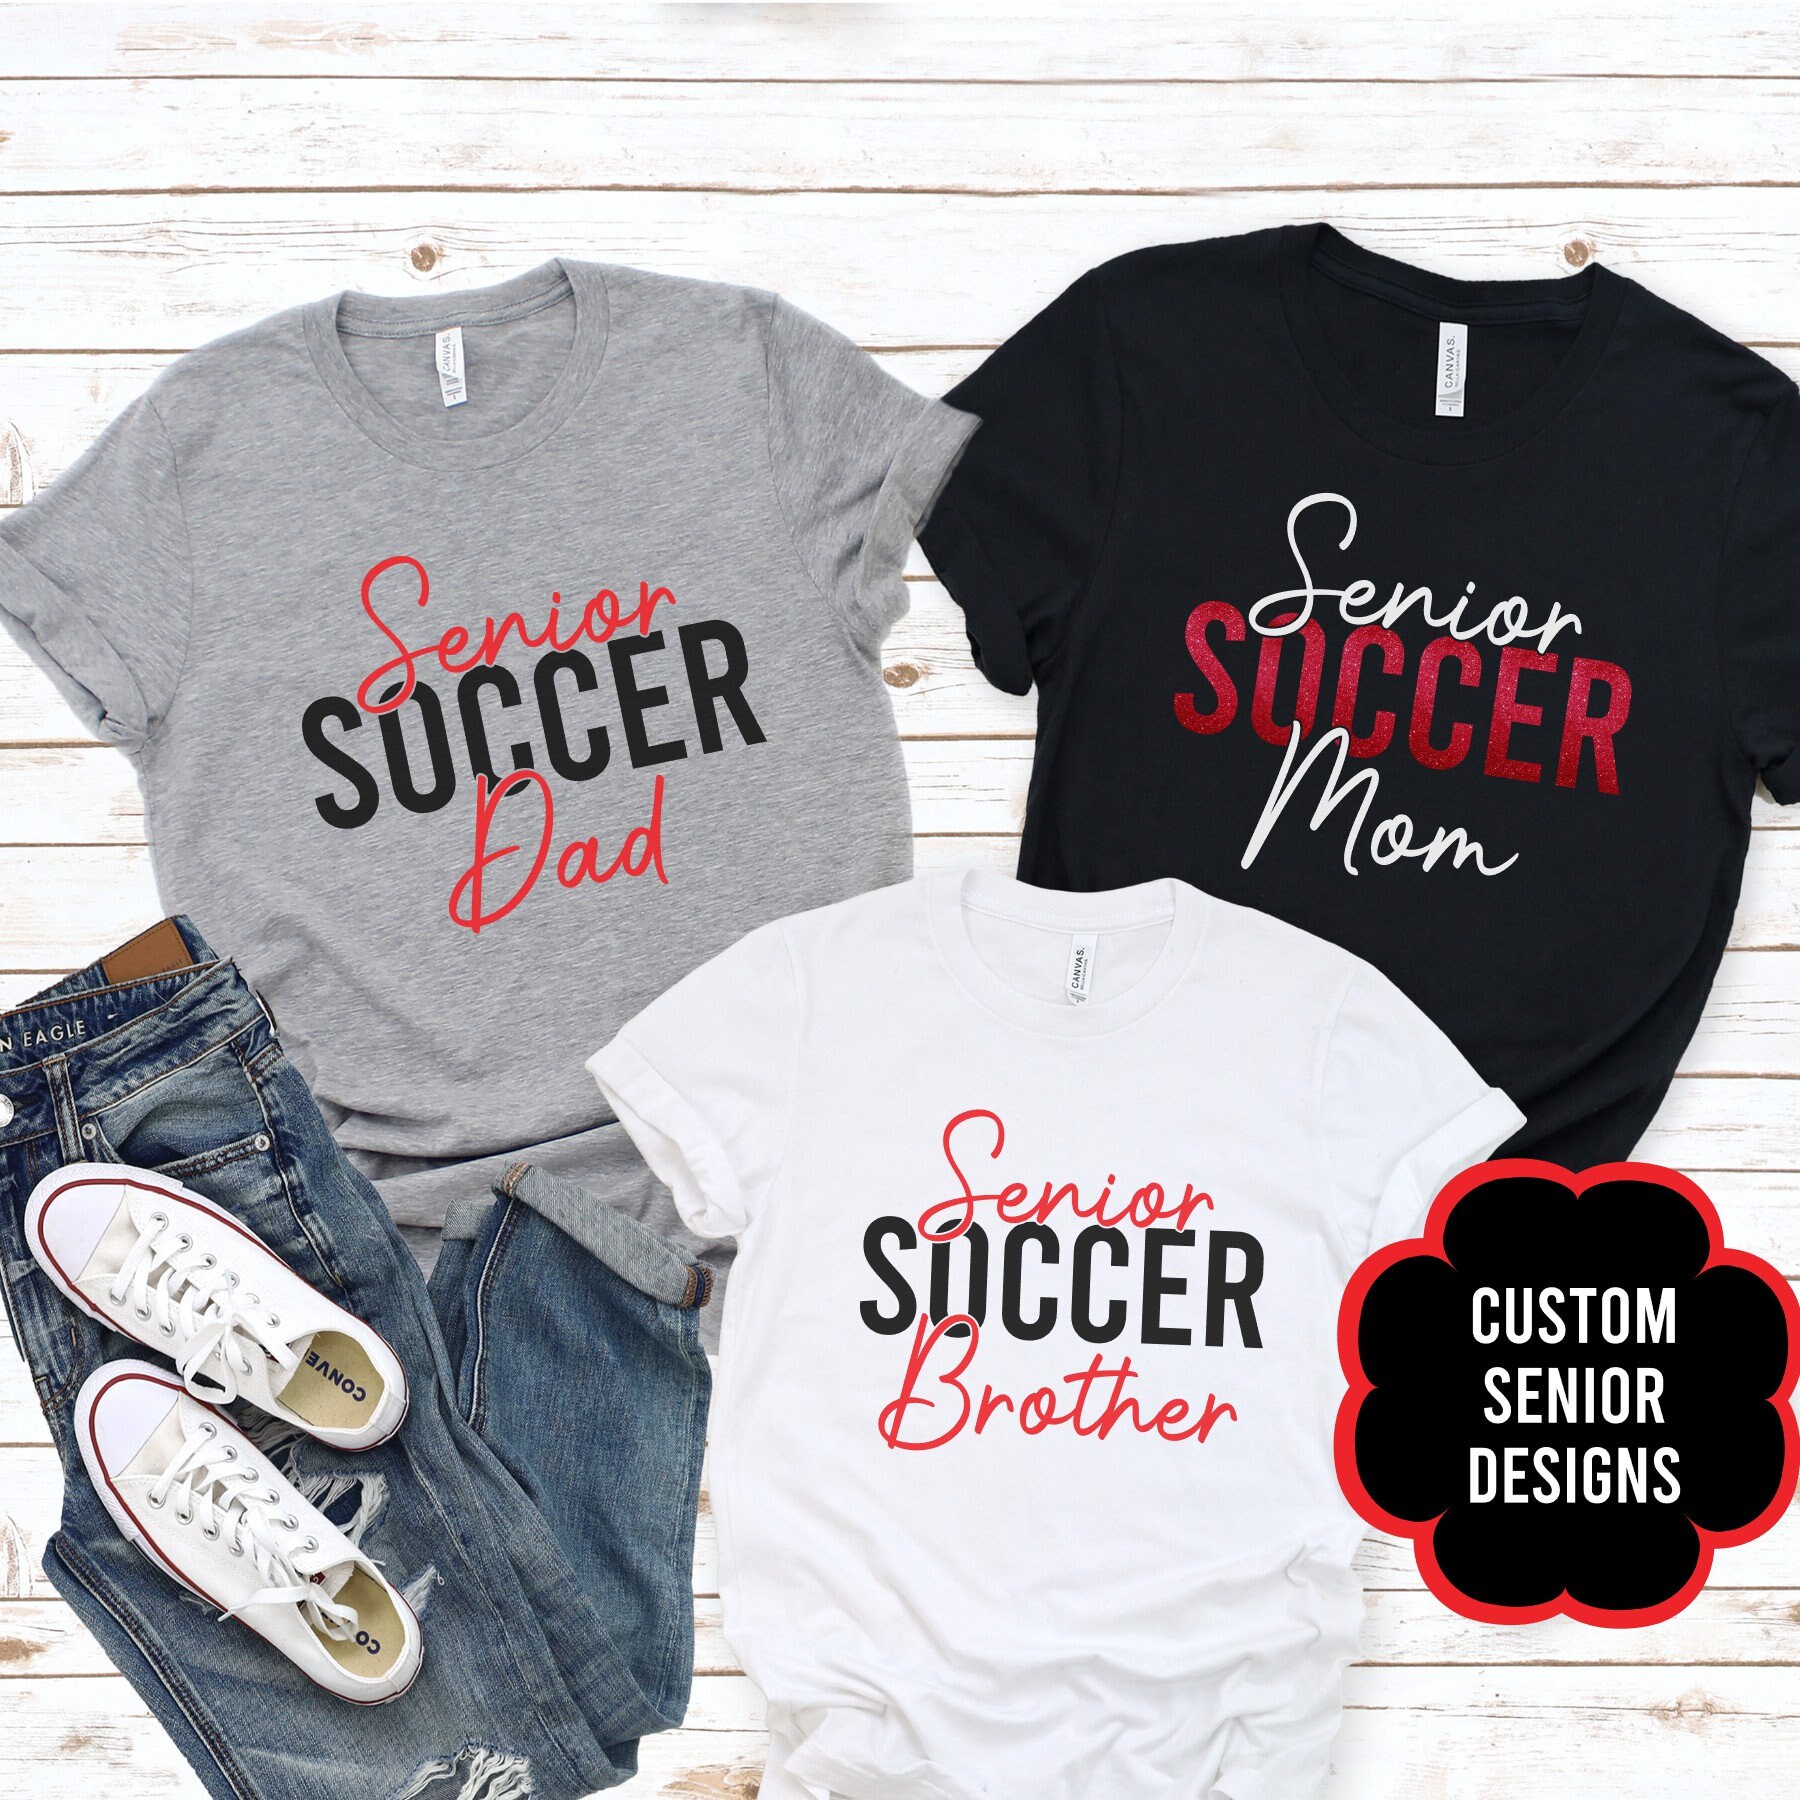 It's called soccer now Usa soccer 2022 T-shirt, hoodie, sweater, long  sleeve and tank top